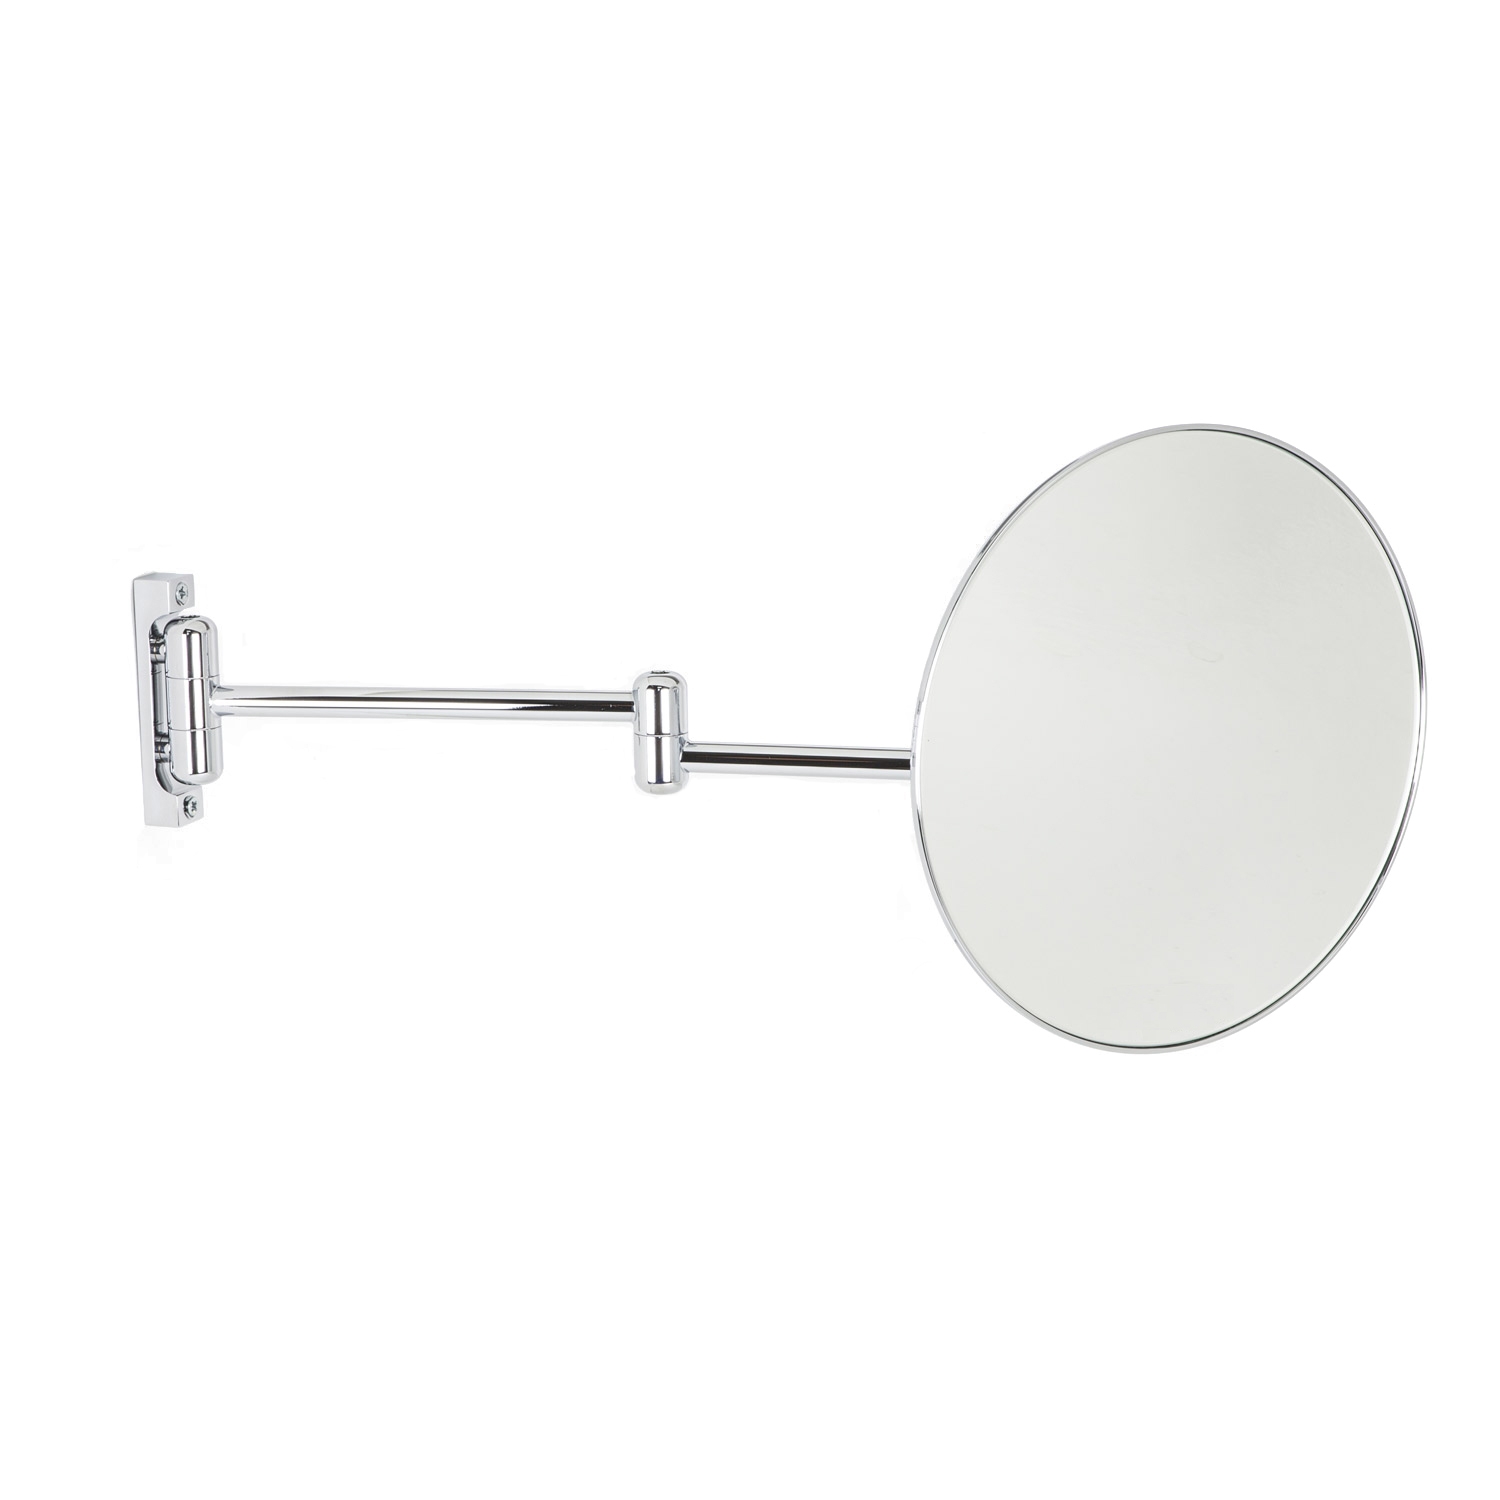 Discolo 38-2 x3 by 9.1 Dia. x 18.1 Extension Magnifying Mirror, in Chromed Plated Brass Structure and Frame in Chromed Plated Abs